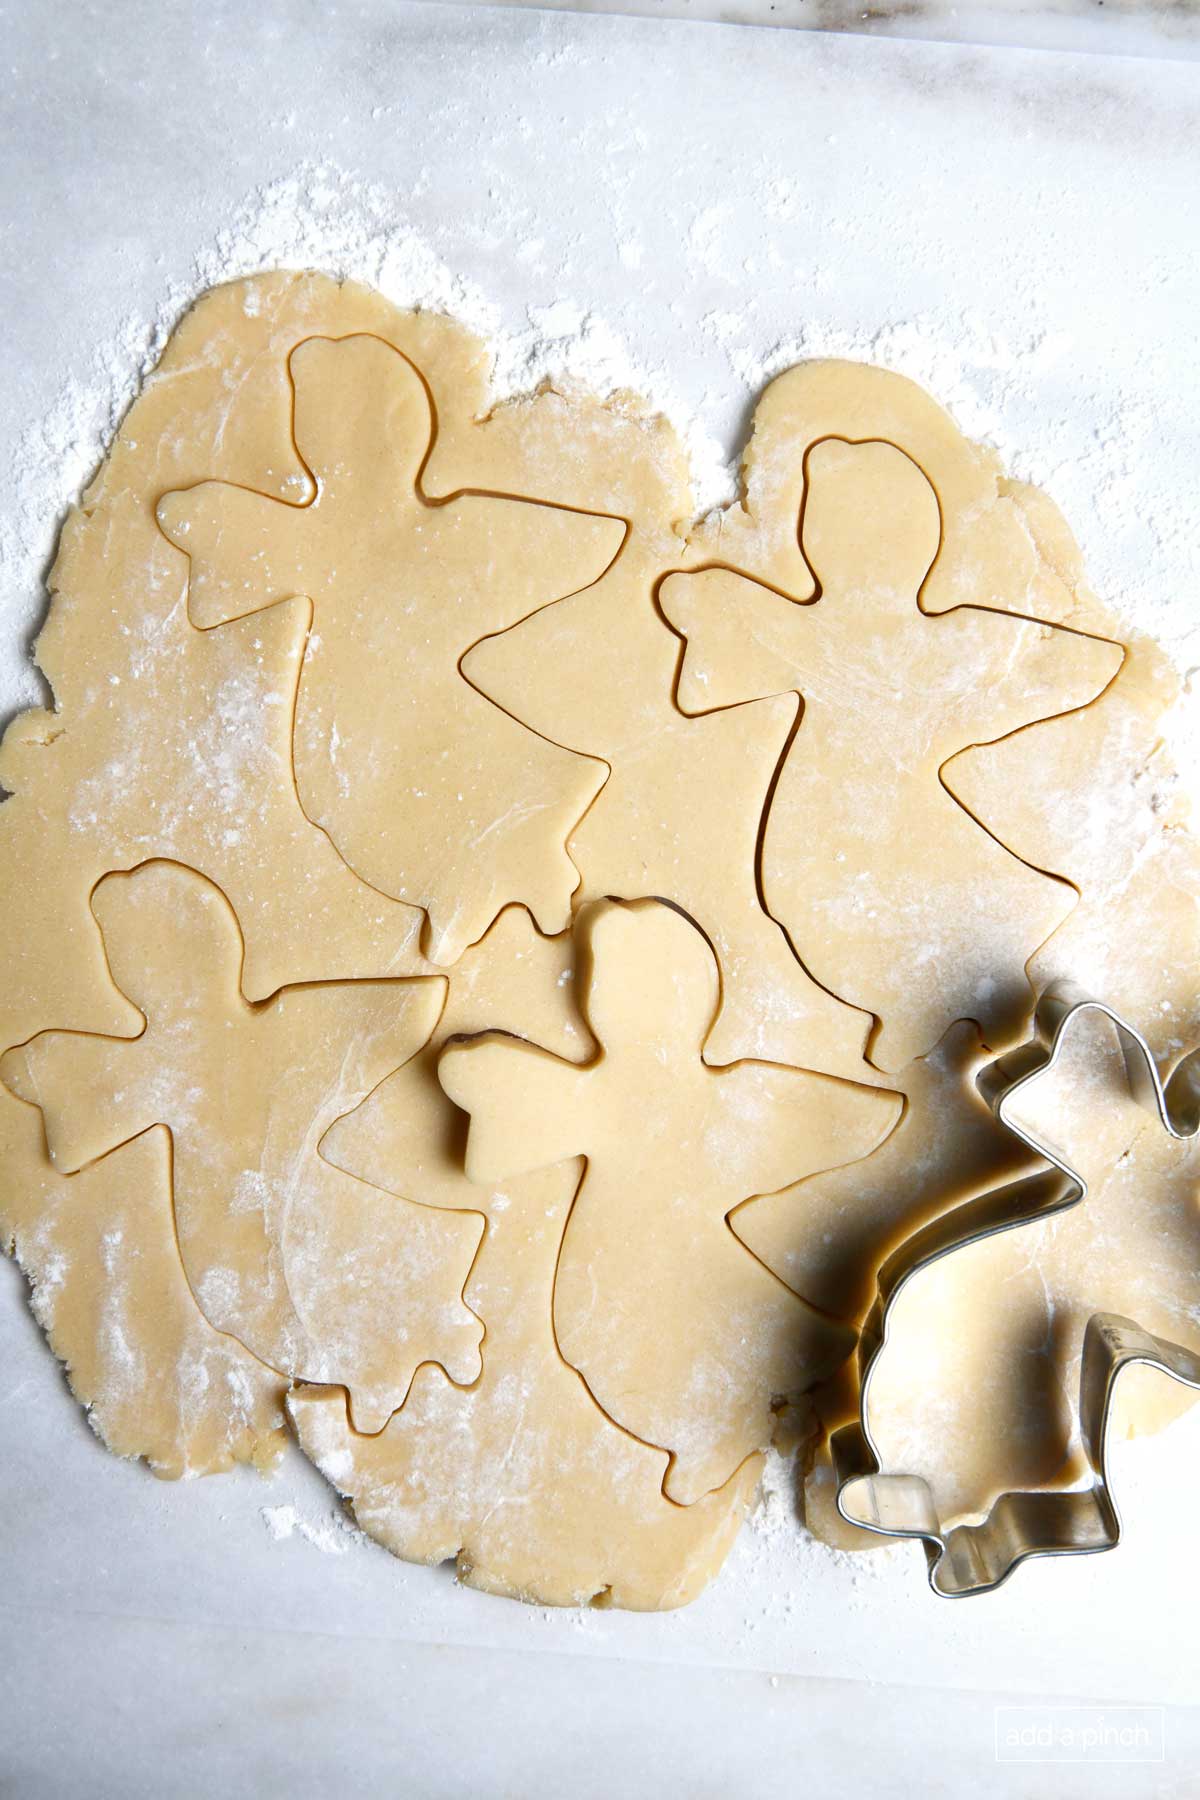 Photo of rolled sugar cookie dough with angel cookie cut-outs.